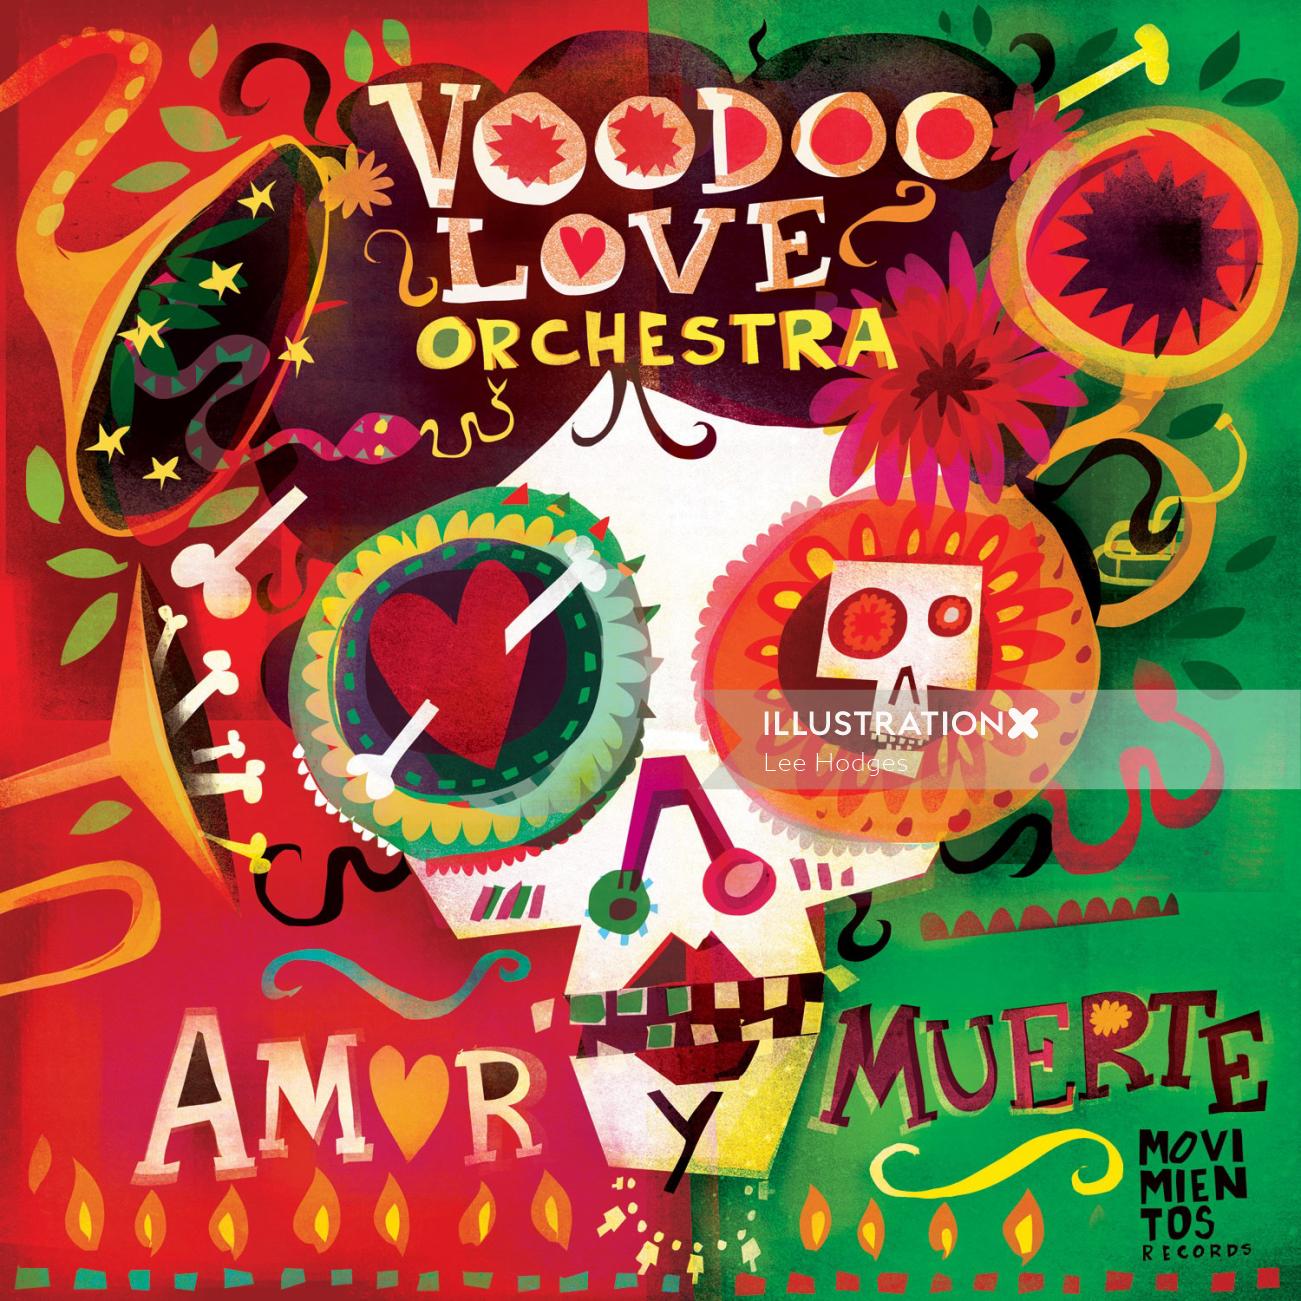 Illustration for voodoo love orchestra album by Lee Hodges